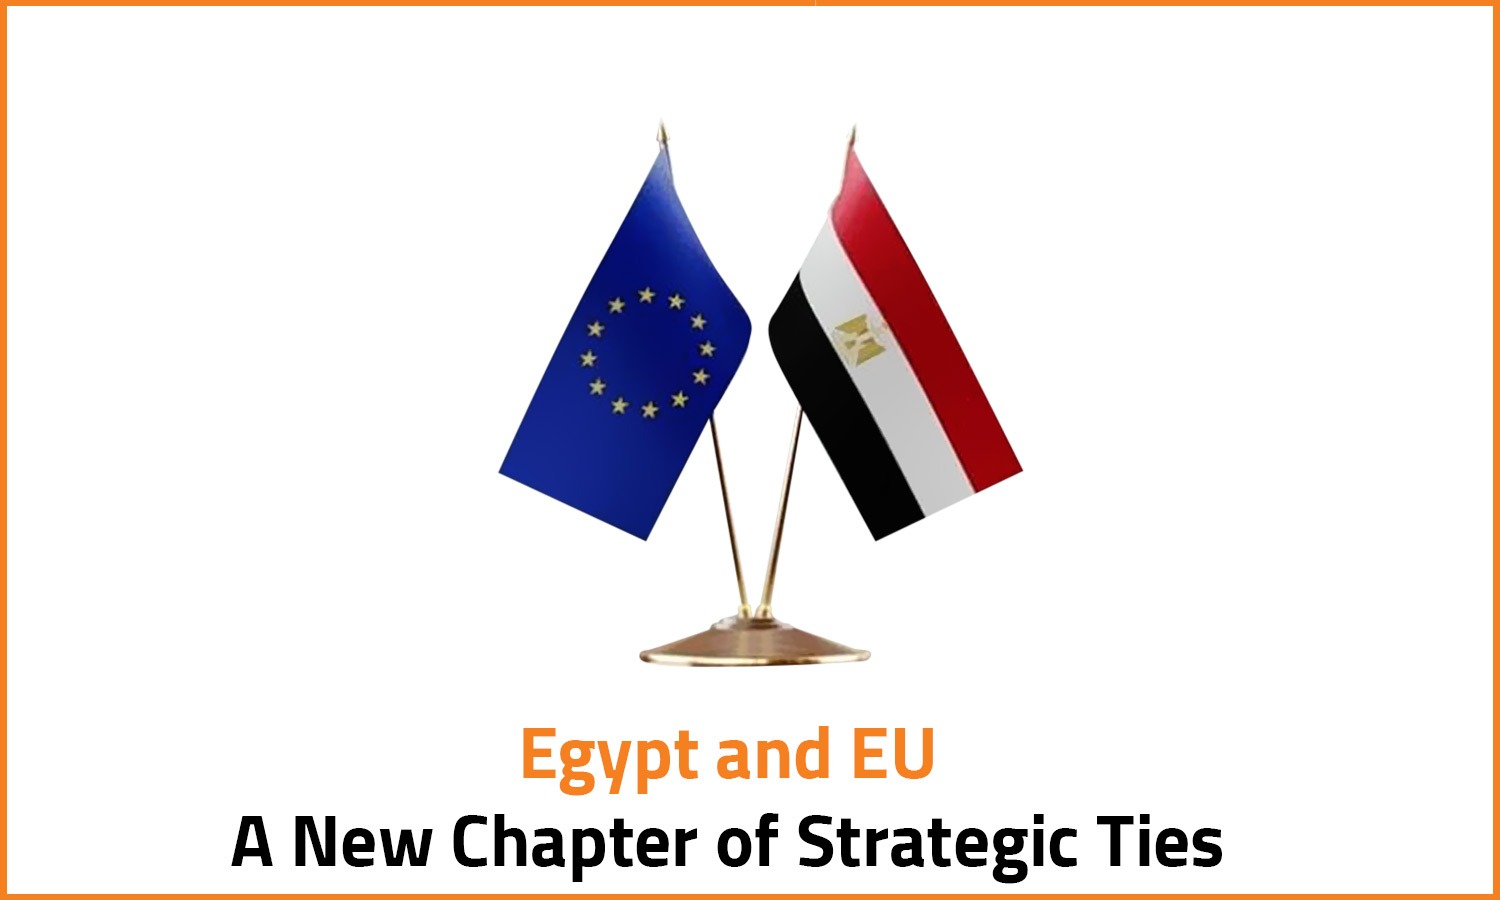 Egypt and EU: A New Chapter of Strategic Ties